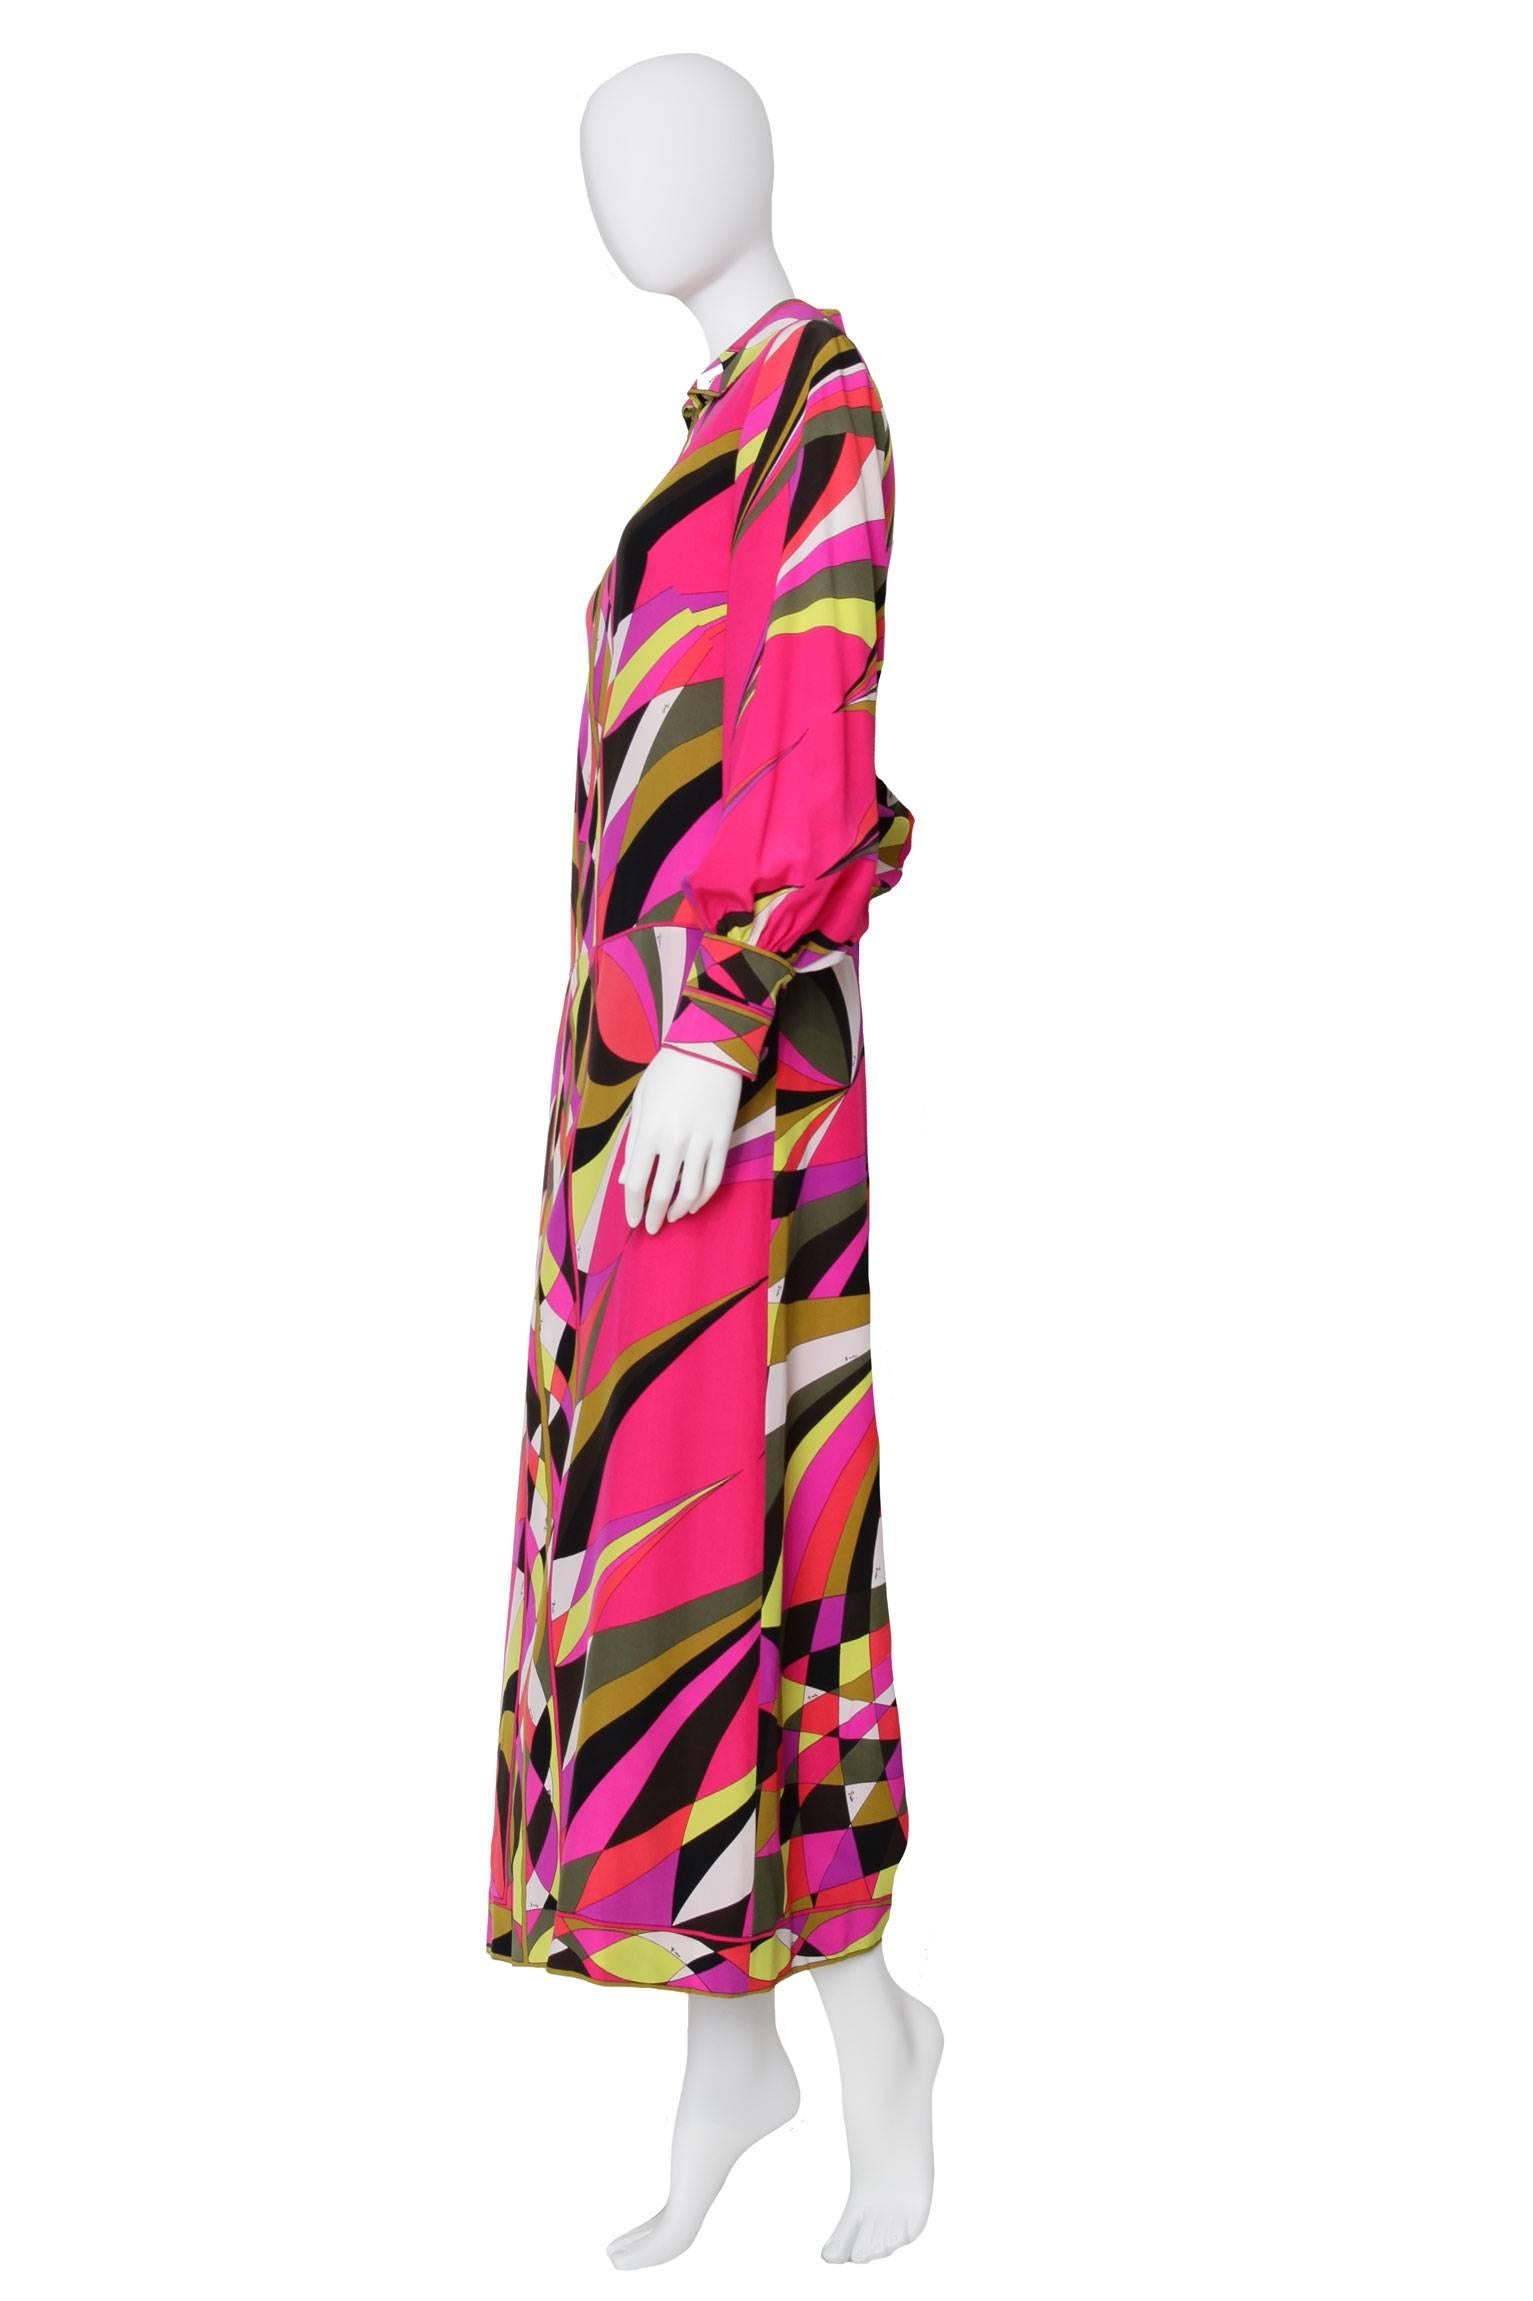 An incredible 1970s Emilio Pucci drop-waist ankle-length evening dress with a front zipper closure and double buttoned cuffs. The dress sports a multicolored graphic print which is characteristic of the house. The print is held in a bright pink